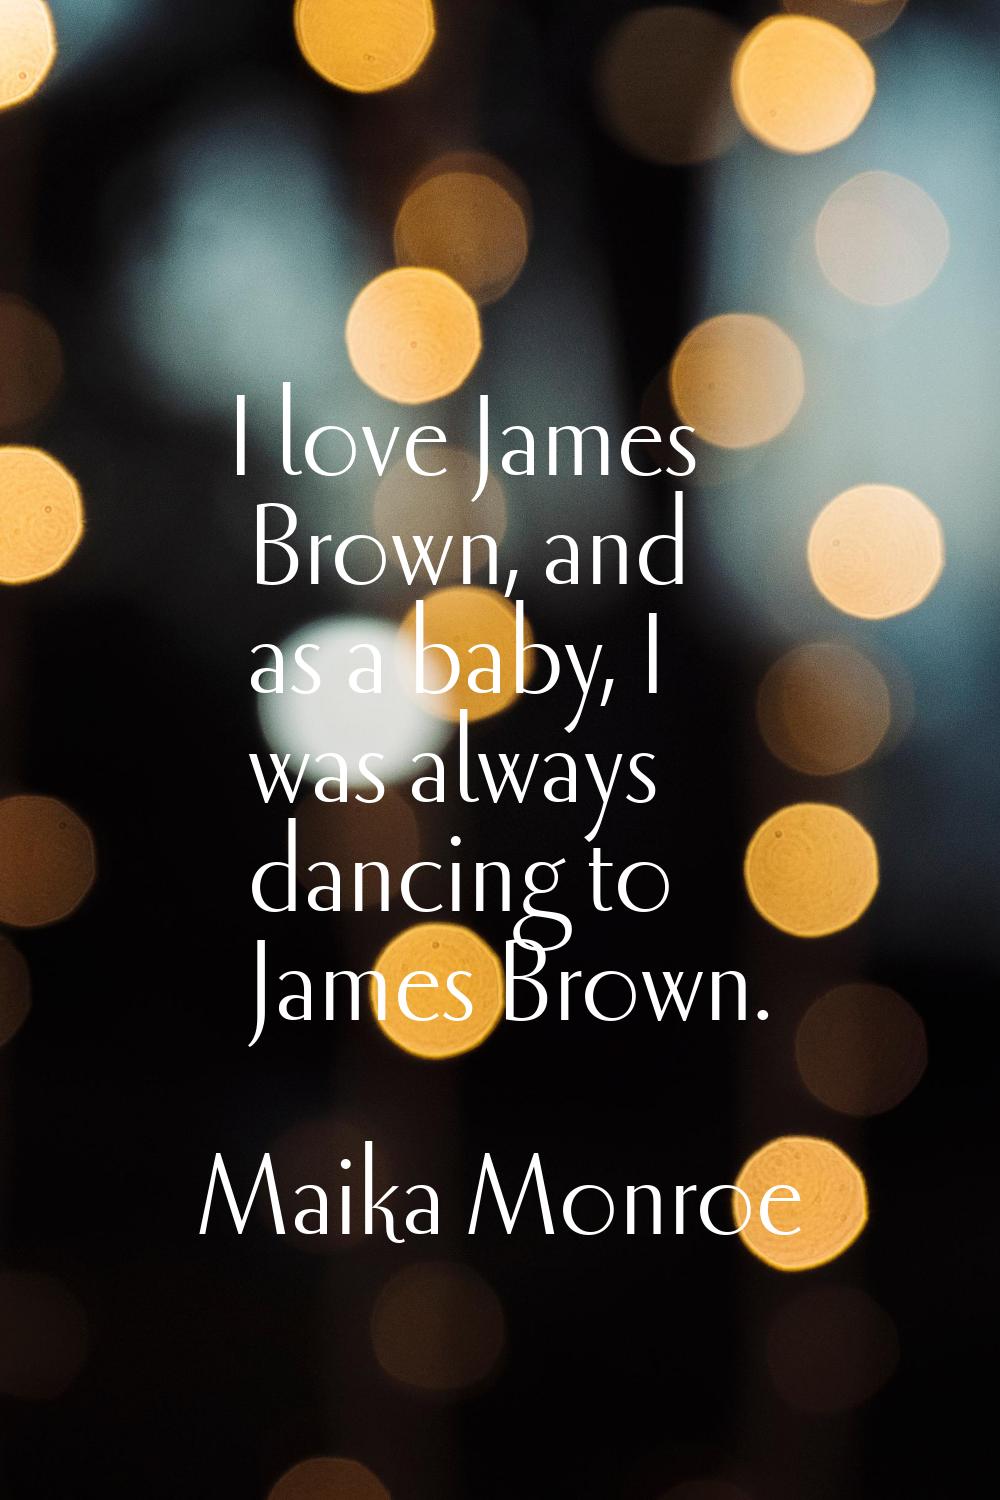 I love James Brown, and as a baby, I was always dancing to James Brown.